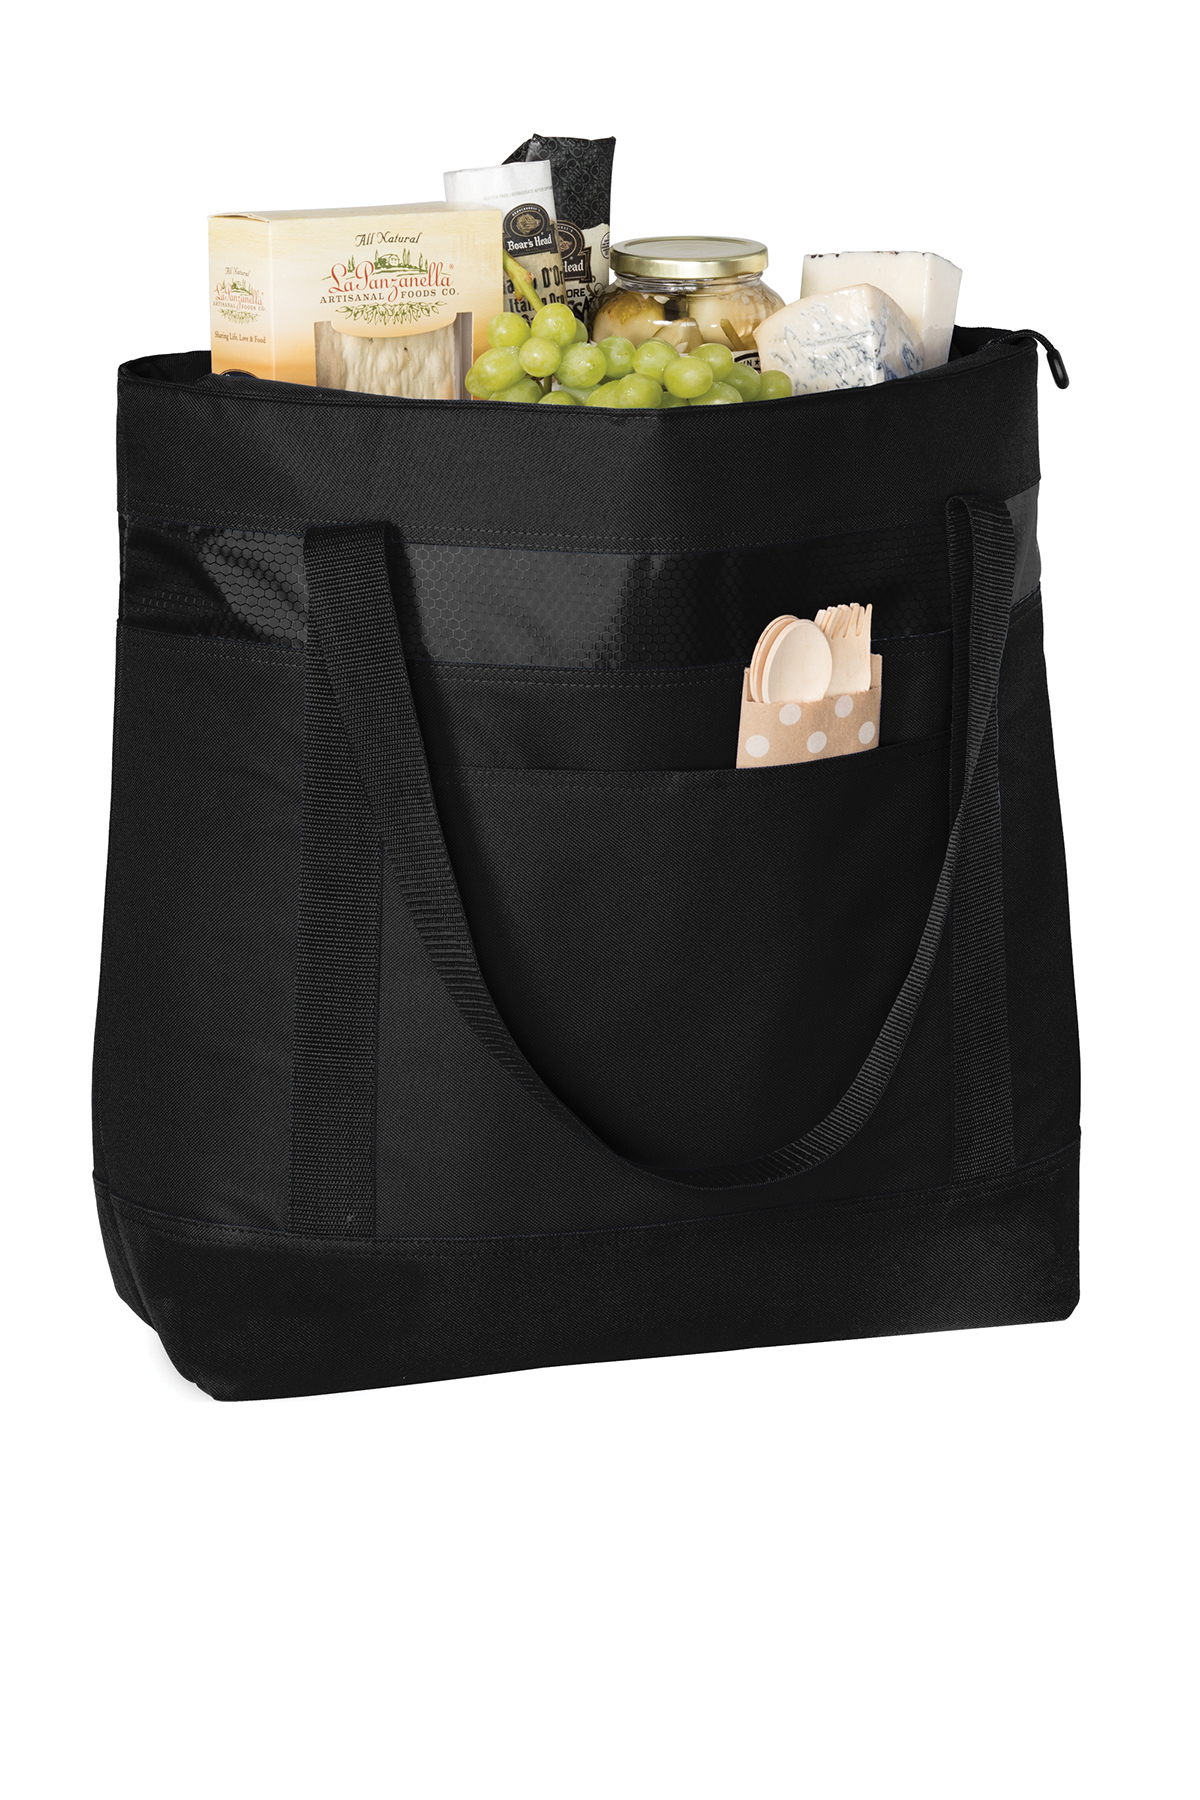 Port Authority Large Tote Cooler | Product | SanMar